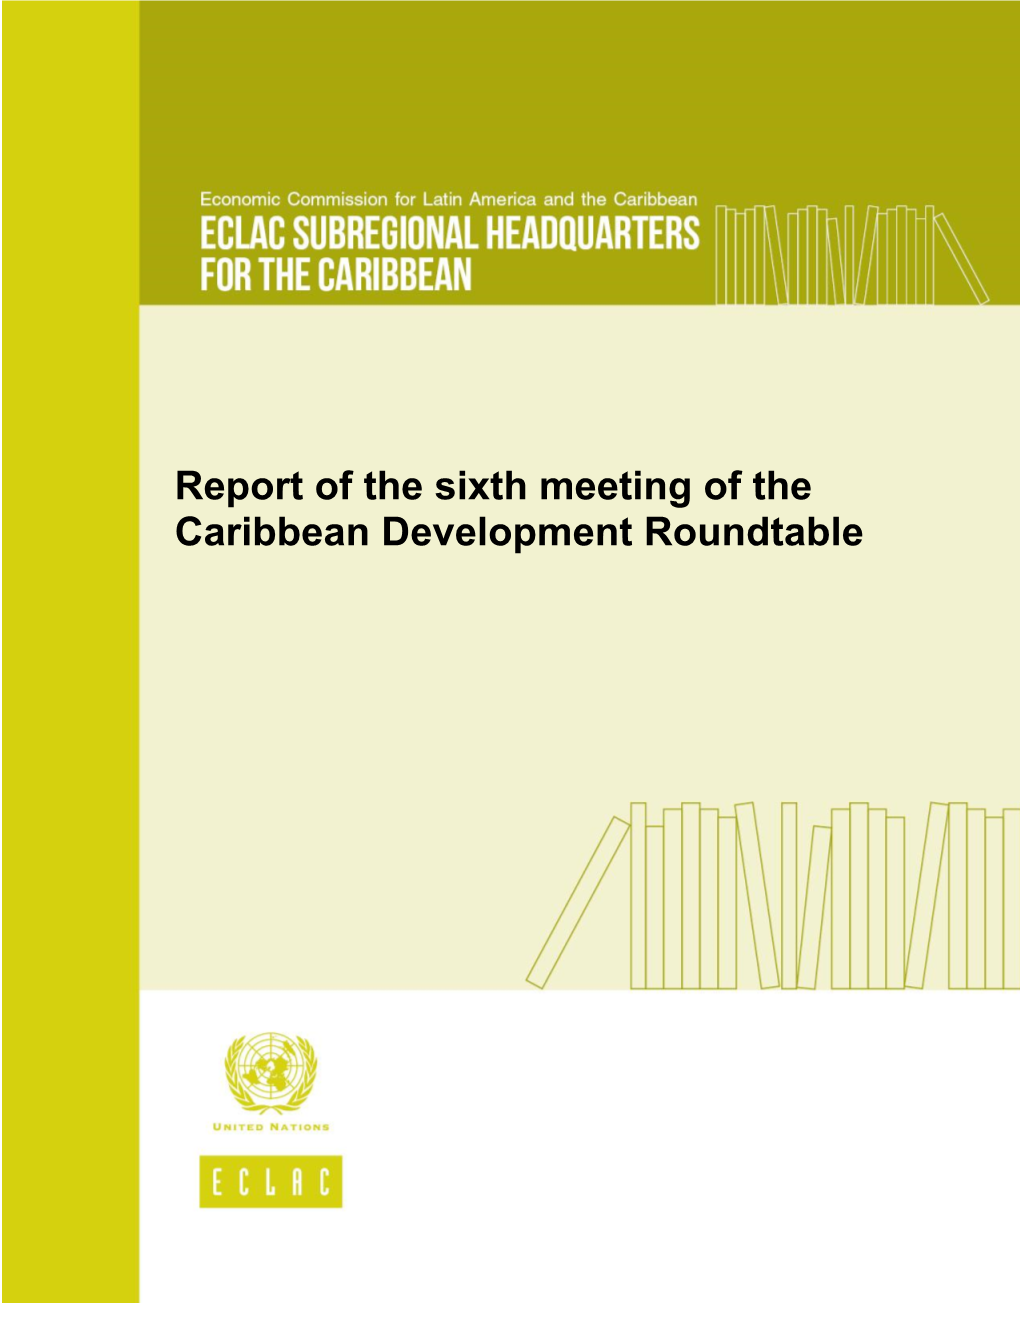 Report of the Sixth Meeting of the Caribbean Development Roundtable